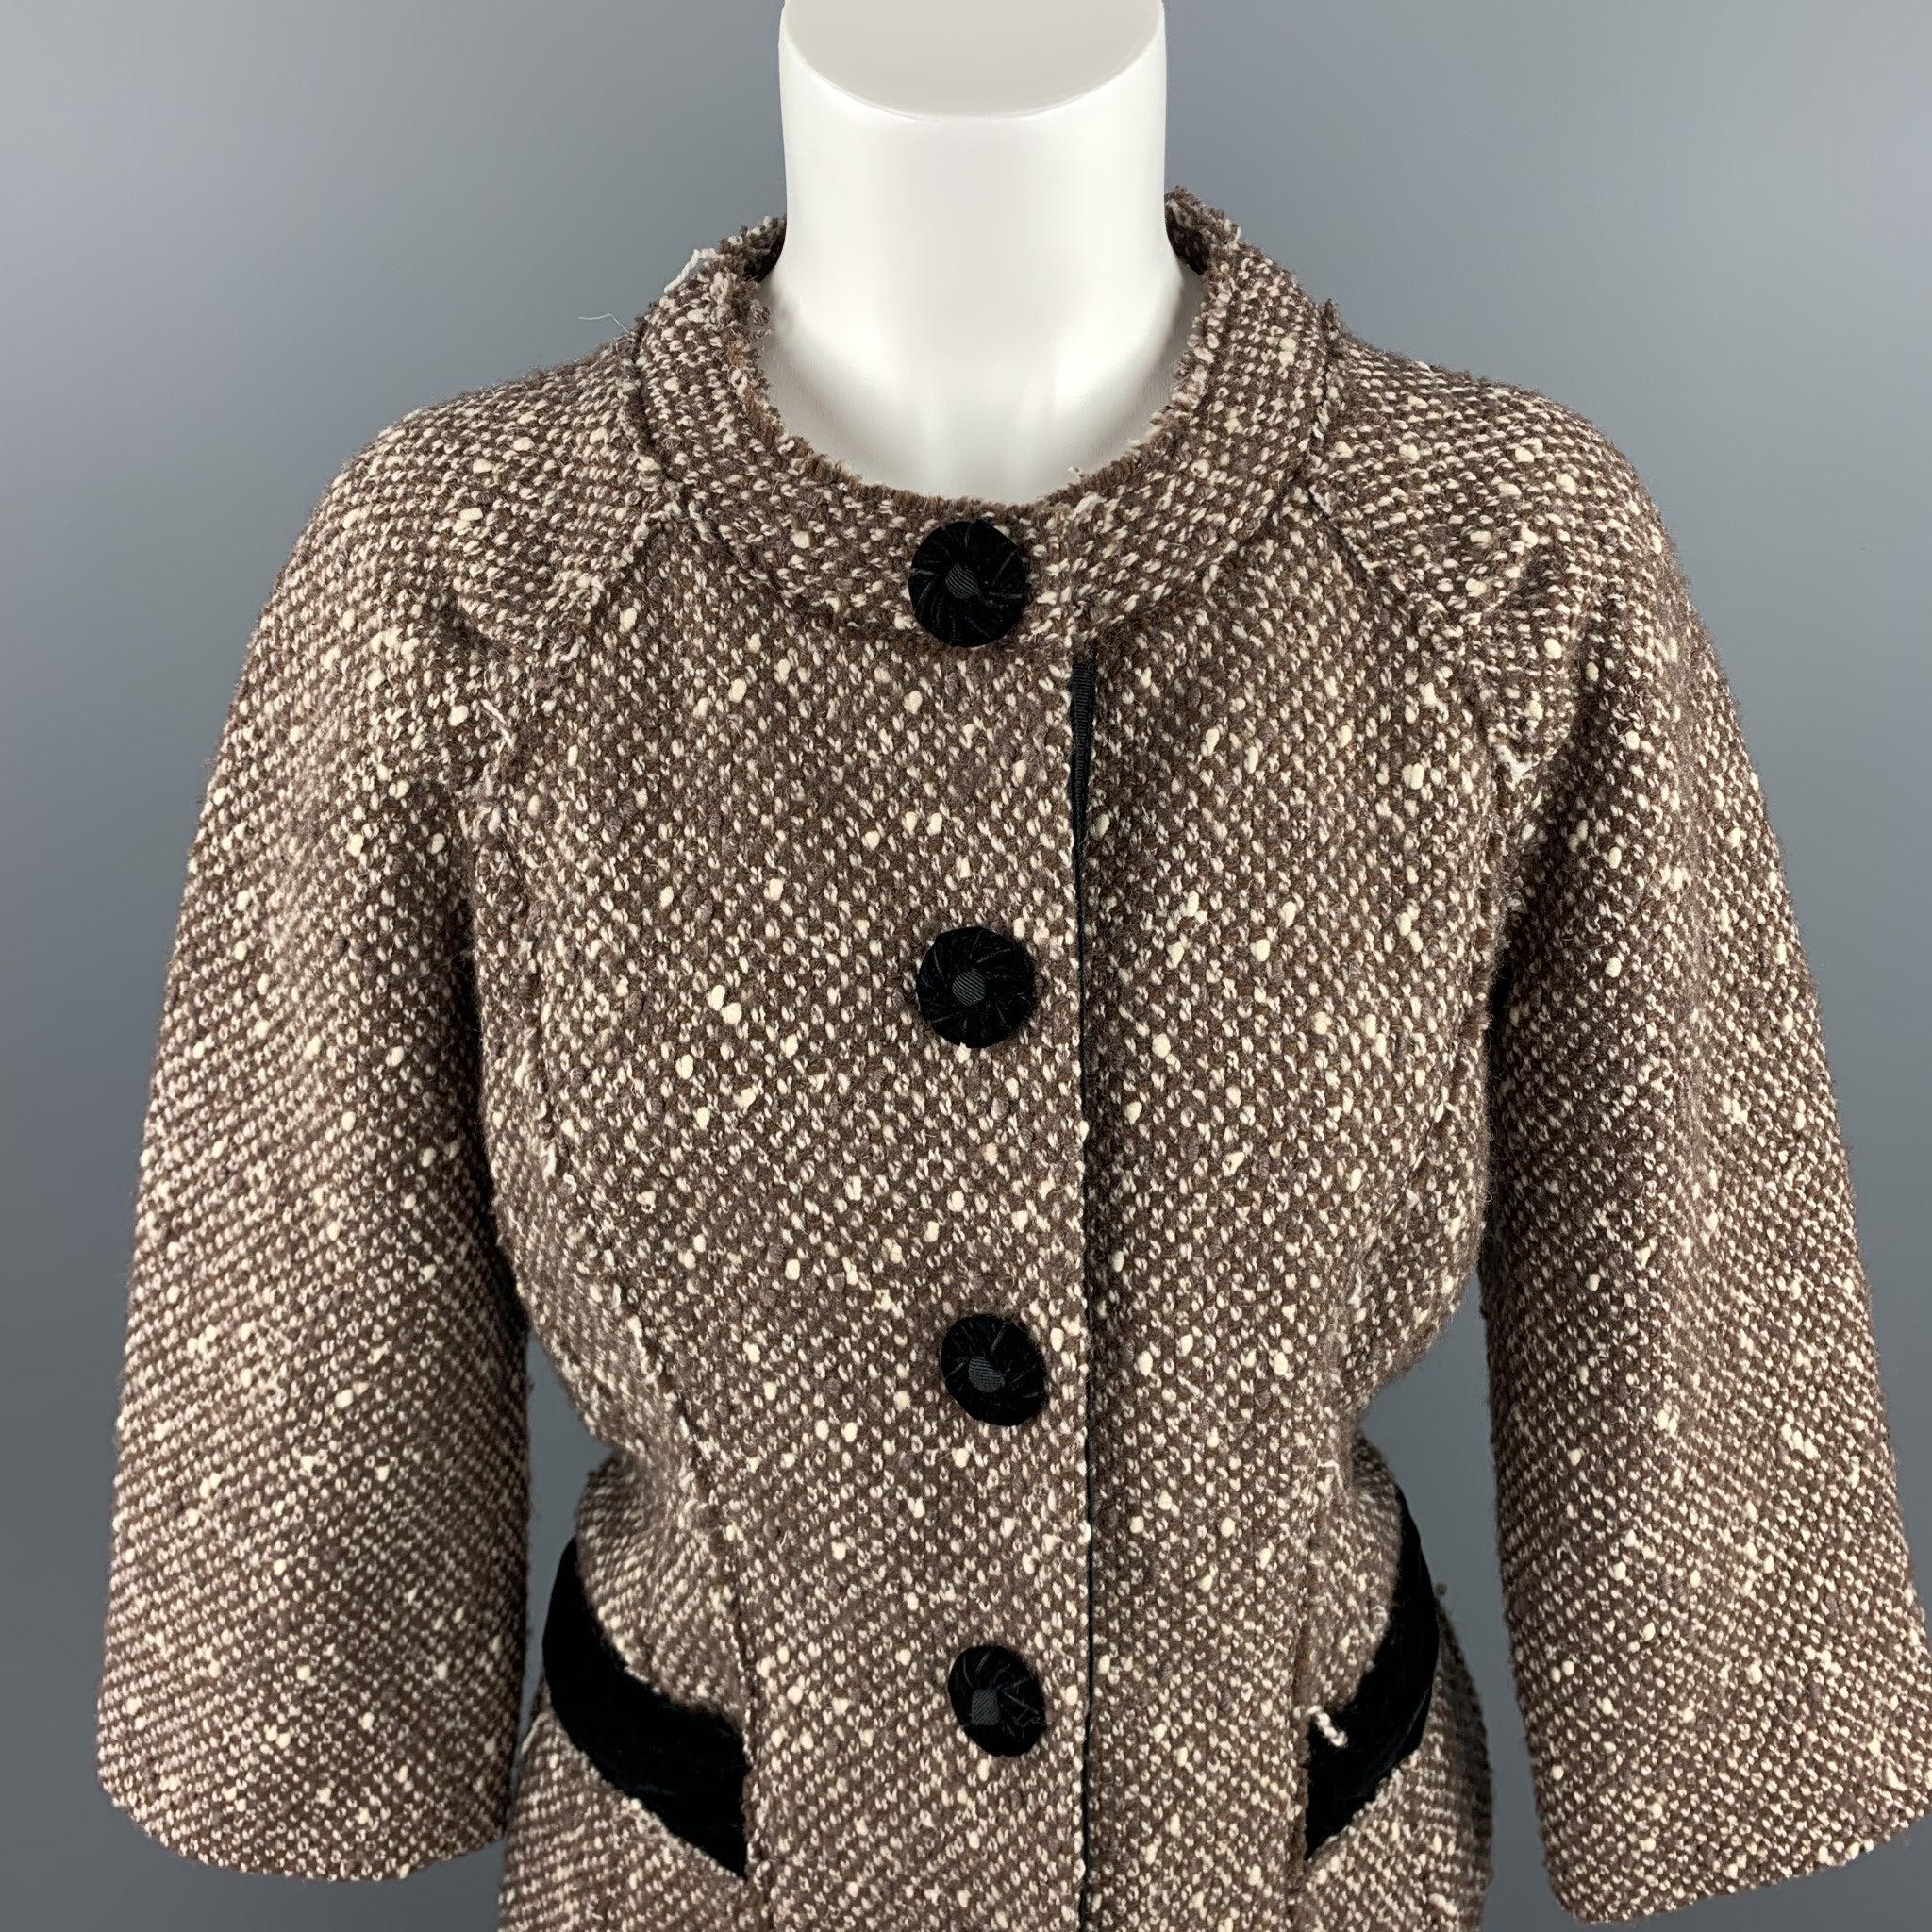 MARC JACOBS jacket comes in a brown boucle wool blend with a black velvet trim featuring a round neck, slit pockets, and a snap button closure with velvet buttons. Made in USA.Very Good
Pre-Owned Condition. 

Marked:   6 

Measurements: 
 
Shoulder: